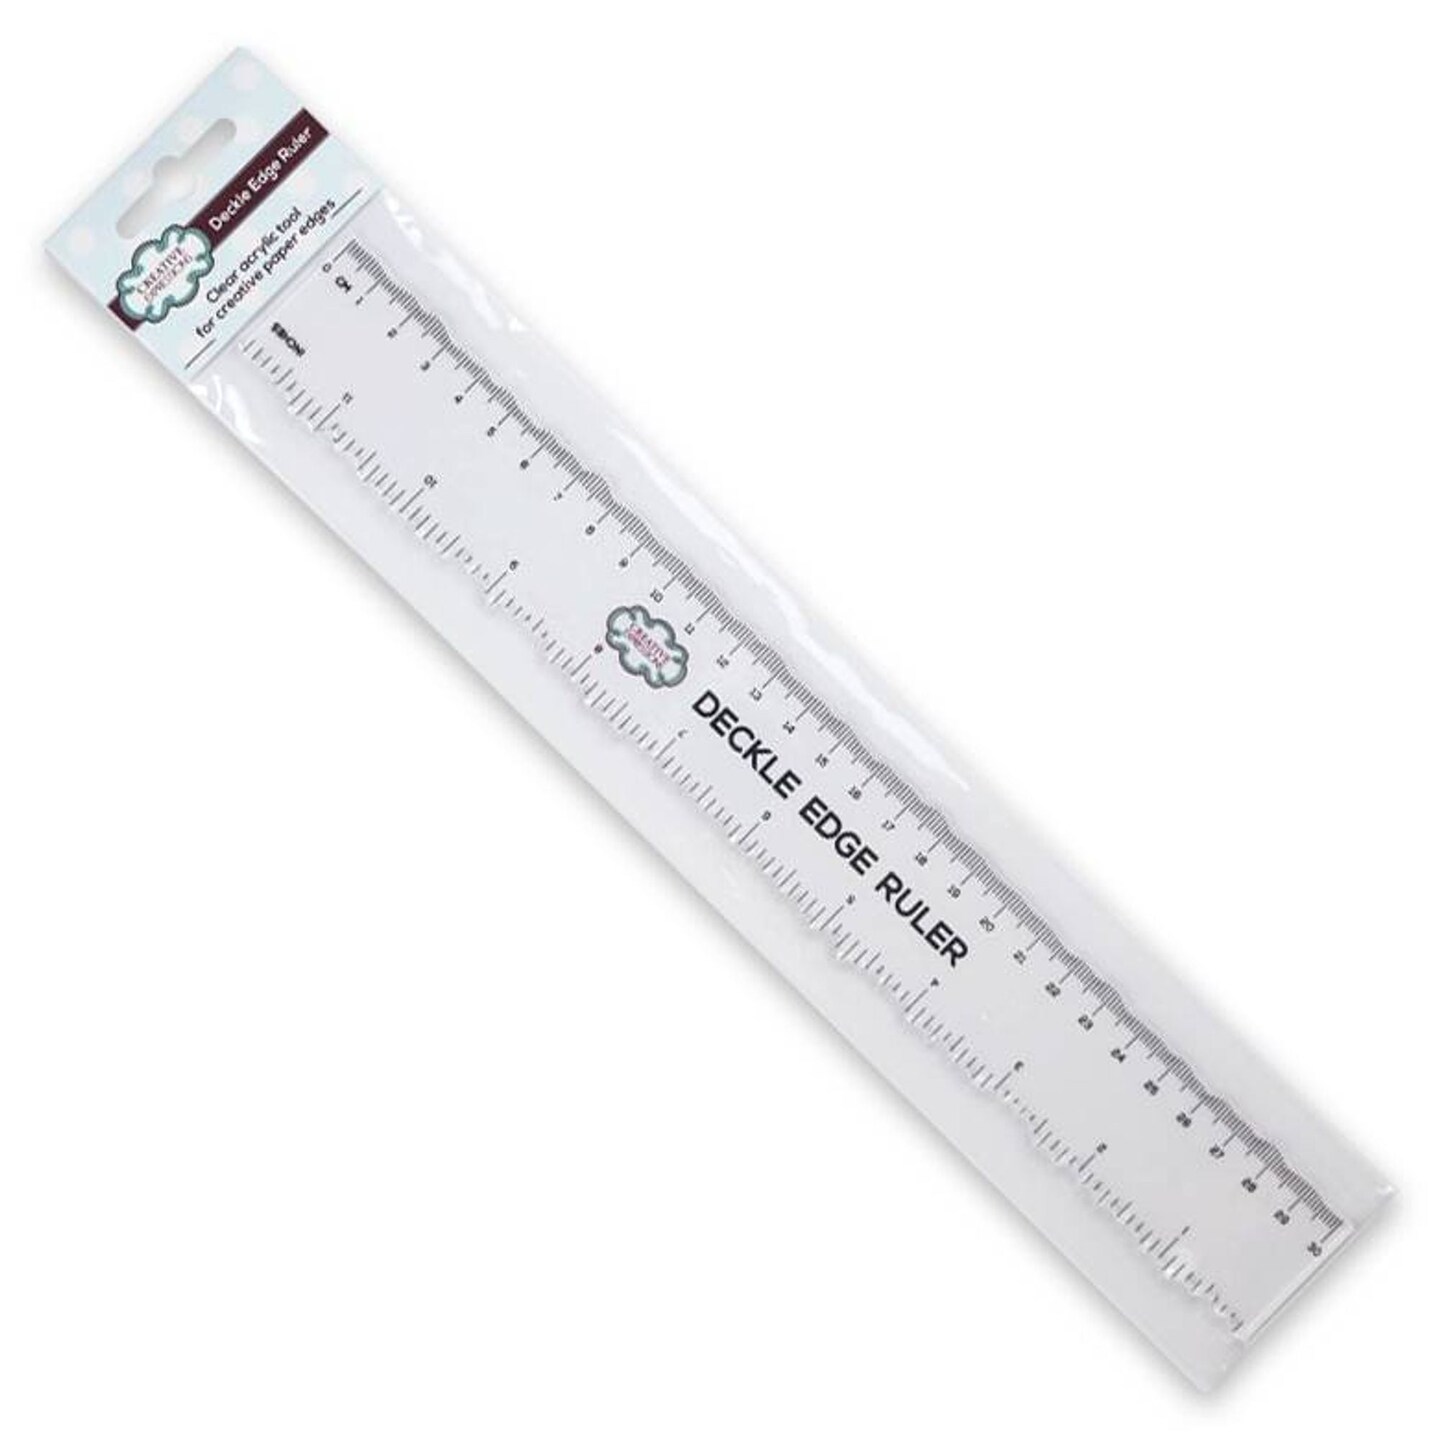  Paper Tearing Ruler Deckle Edge Ruler with 2 Different Edges  Acrylic Irregular Edges Ruler Craft Ruler for Cutting Paper-11.34 inches :  Office Products